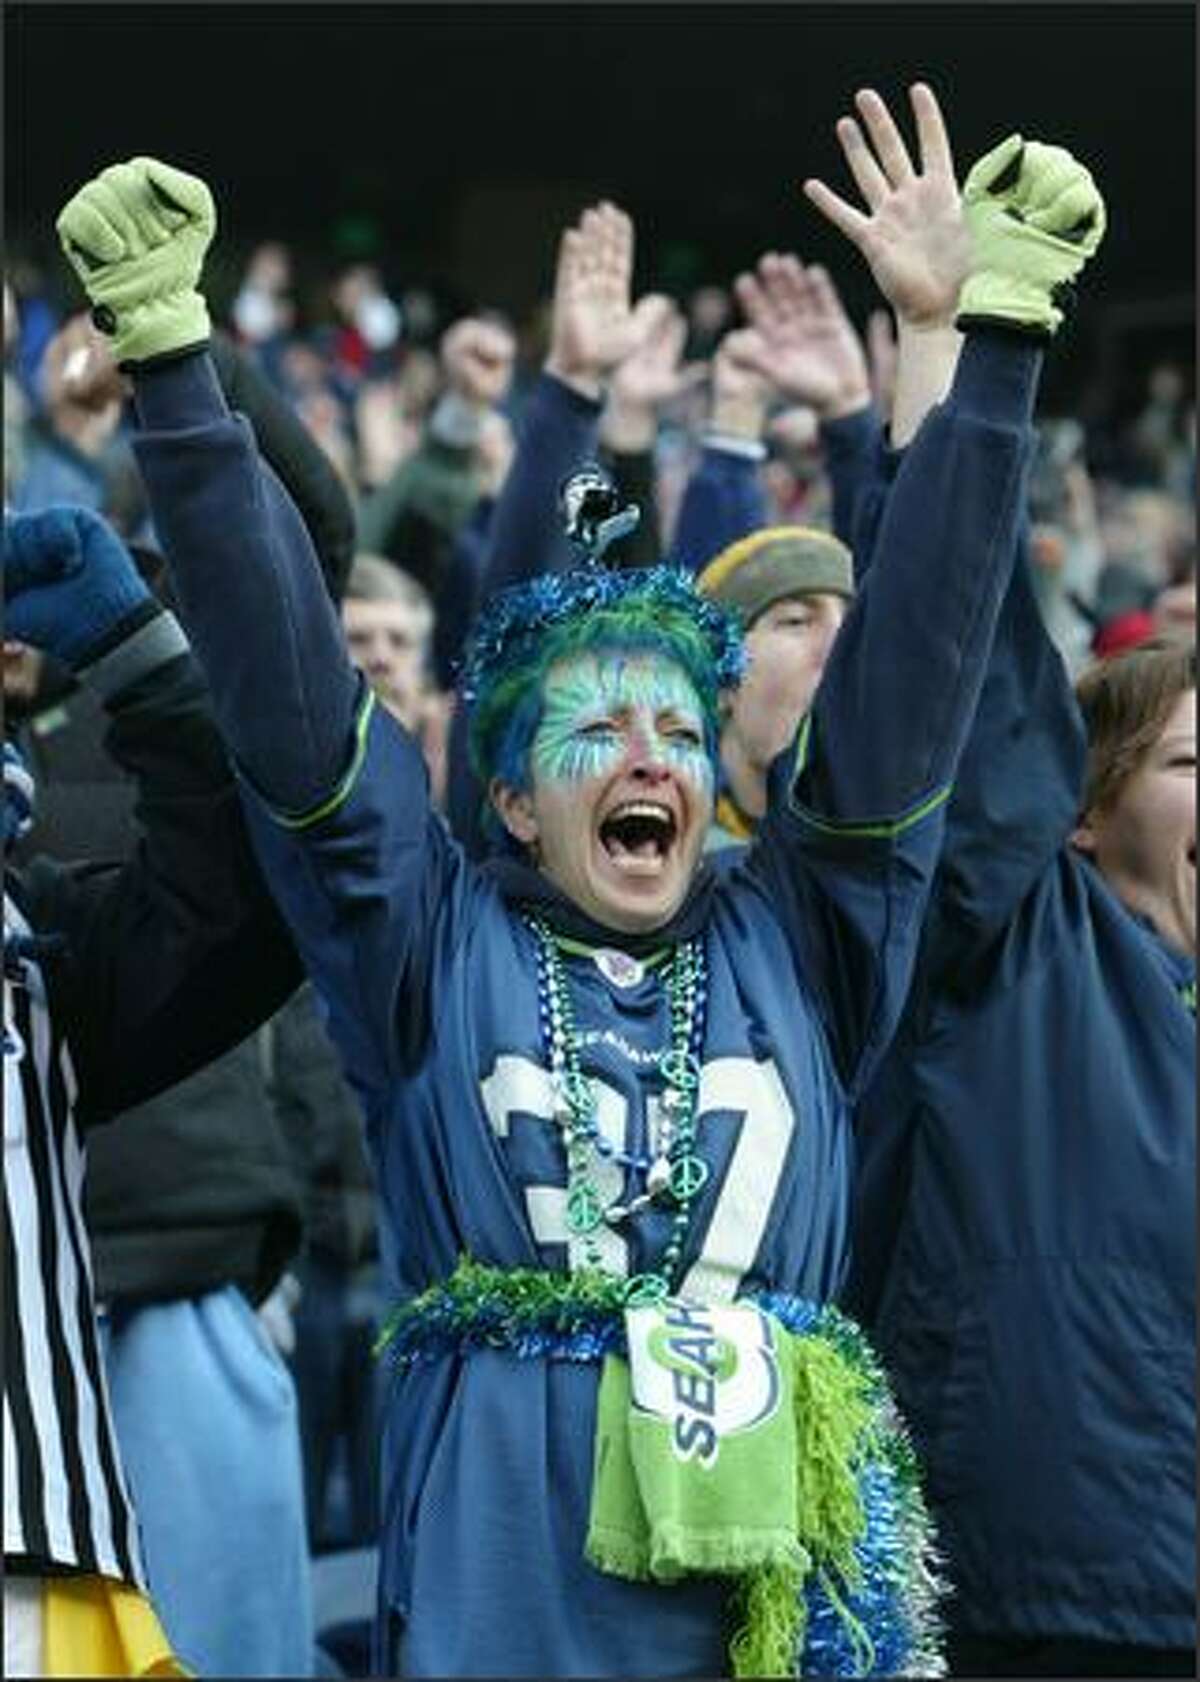 Margy Wick, who came all the way from Soap Lake in Eastern Washington to cheer for the Seahawks in Sunday's game against the San Francisco 49ers at Qwest Field, signals touchdown after a Seattle score in the first quarter.